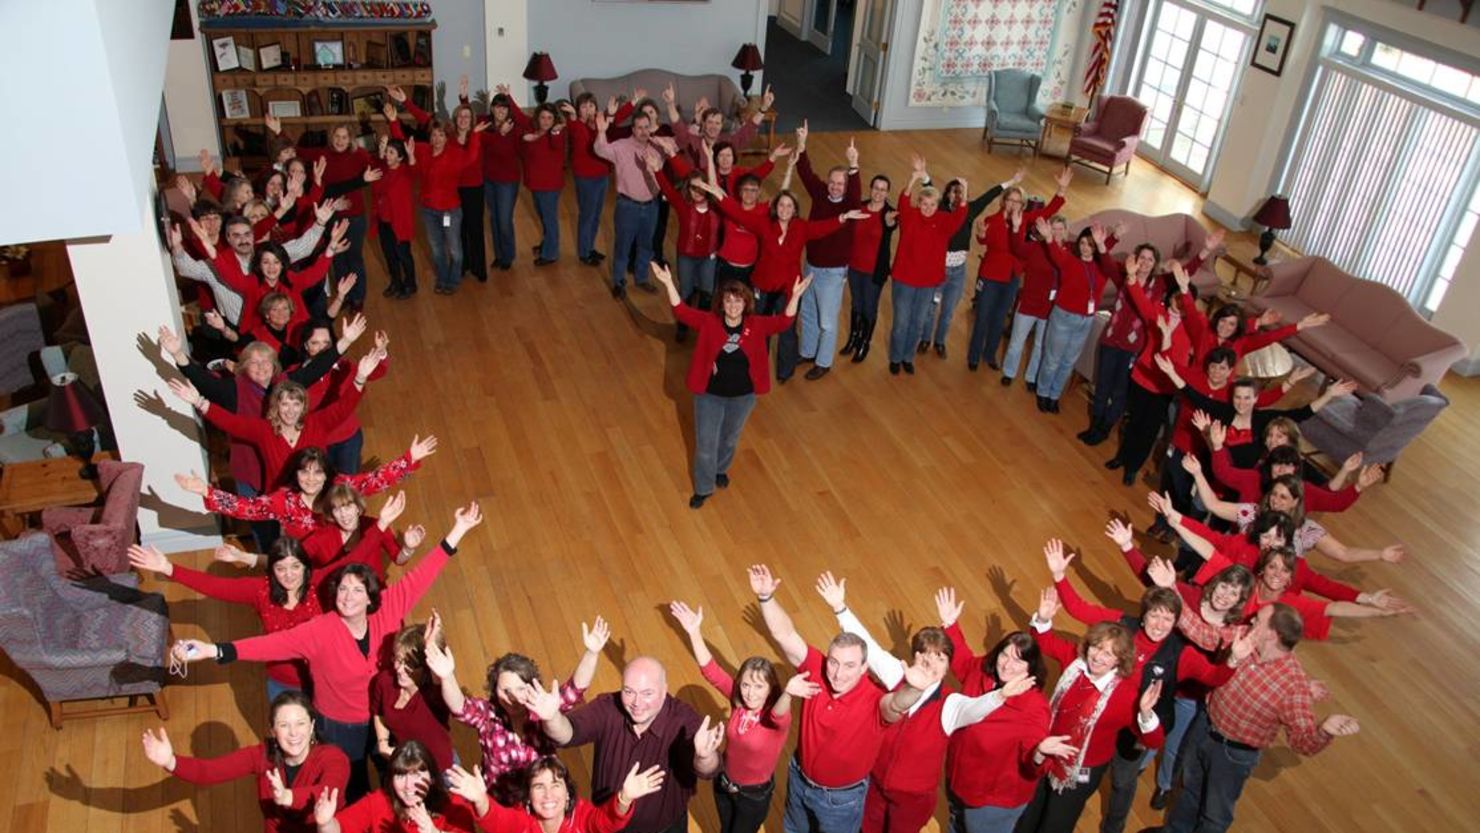 Friday is National Wear Red Day as the American Heart Association's Go Red for Women effort educates women on heart health.